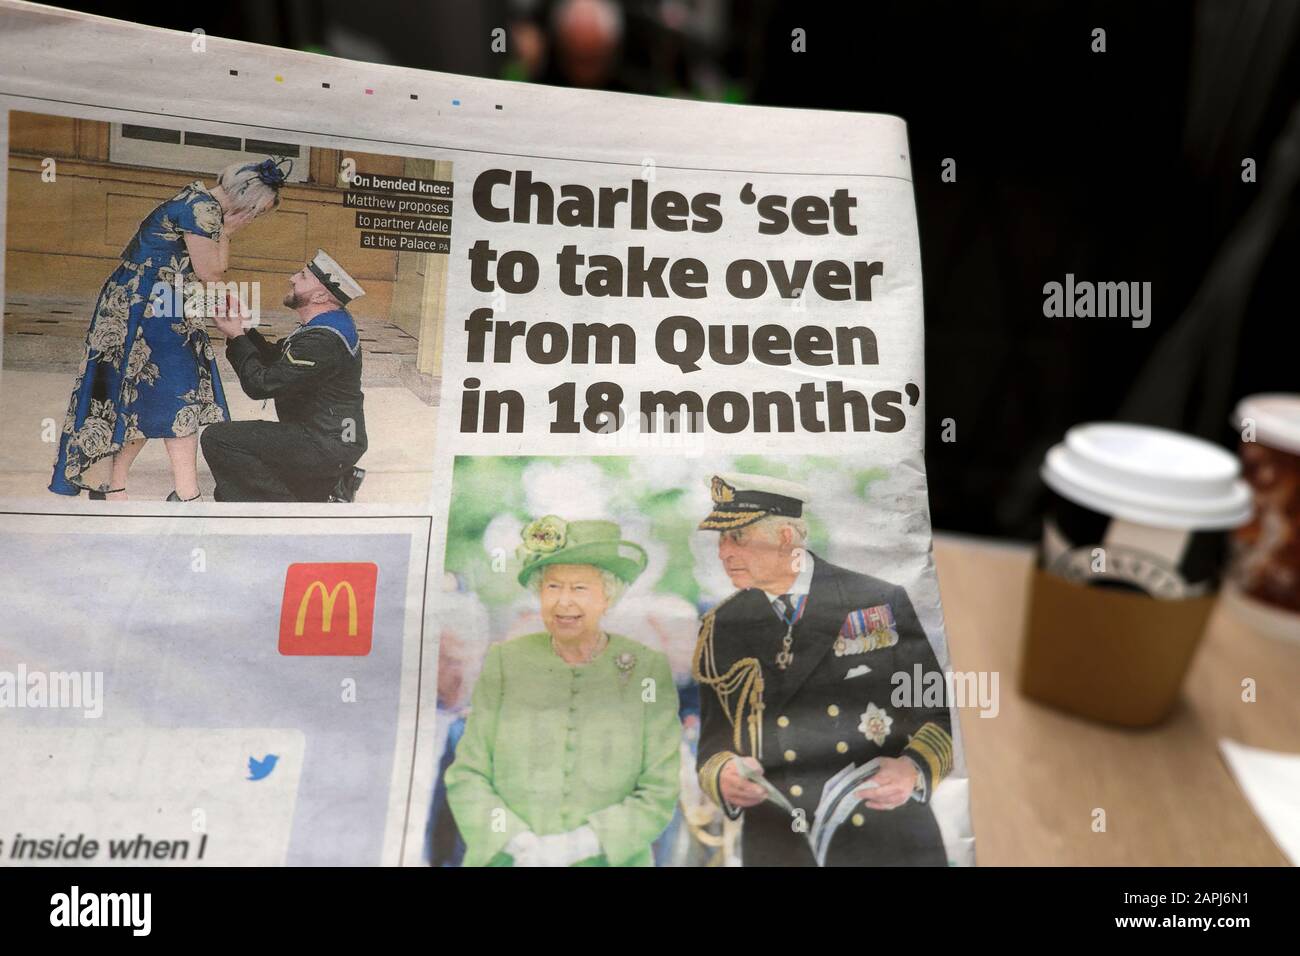 Prince 'Charles set to take over from Queen in 18 months' '  inside Metro newspaper British royals Queen Elizabeth ii November 2019 London England UK Stock Photo